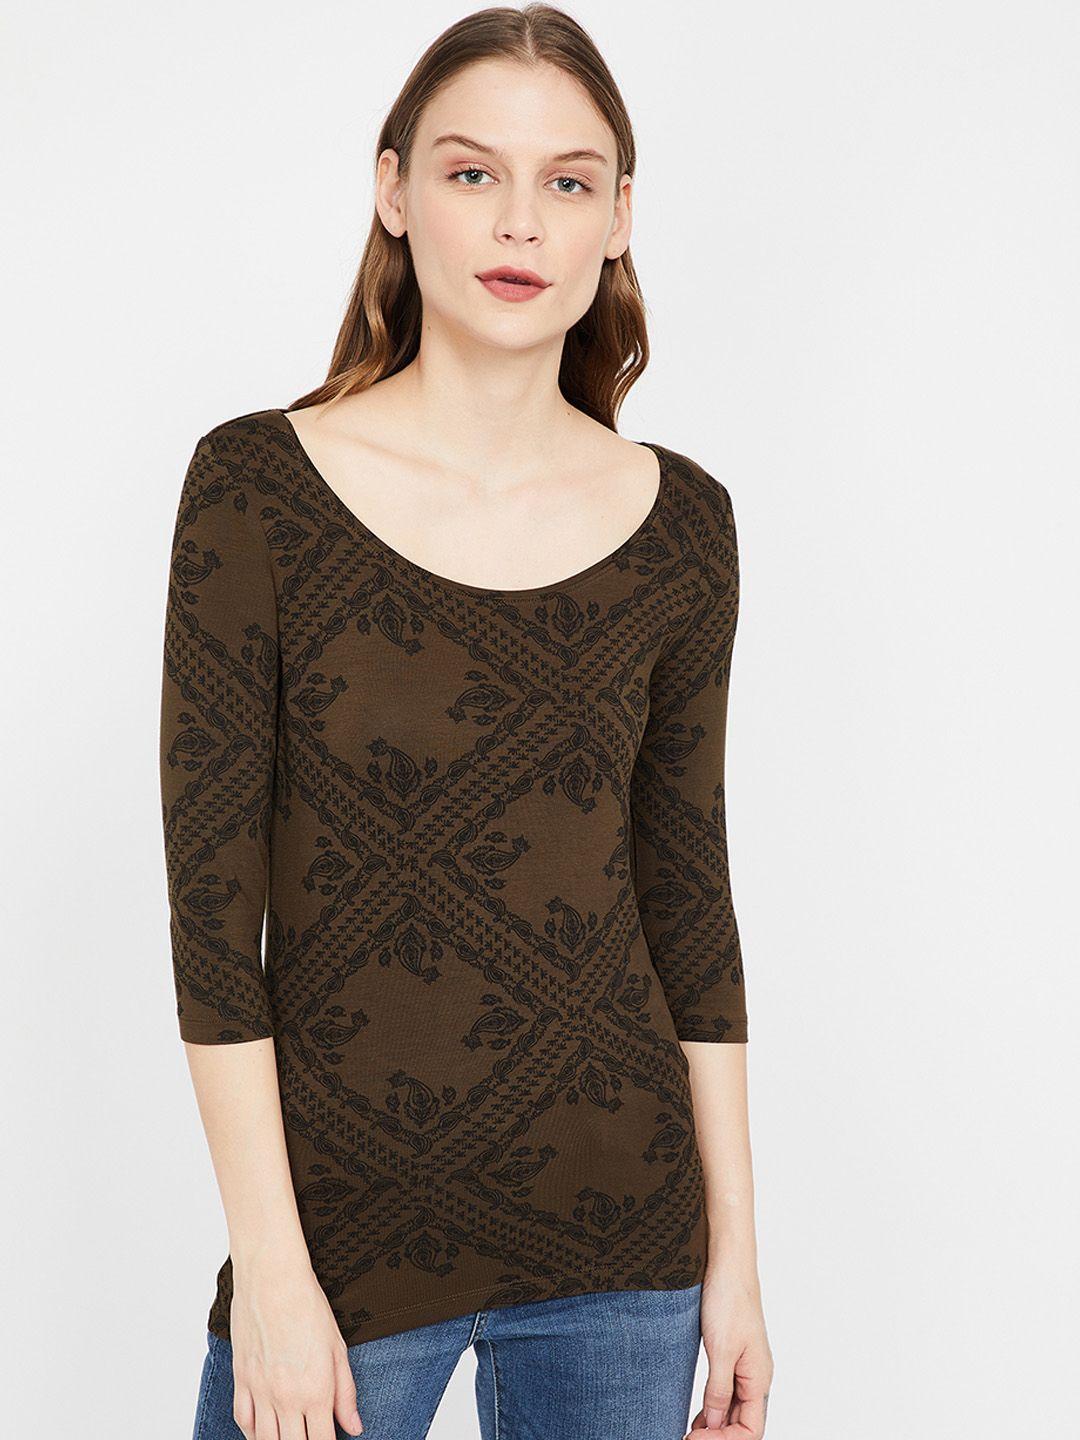 code-by-lifestyle-women-olive-brown-printed-top